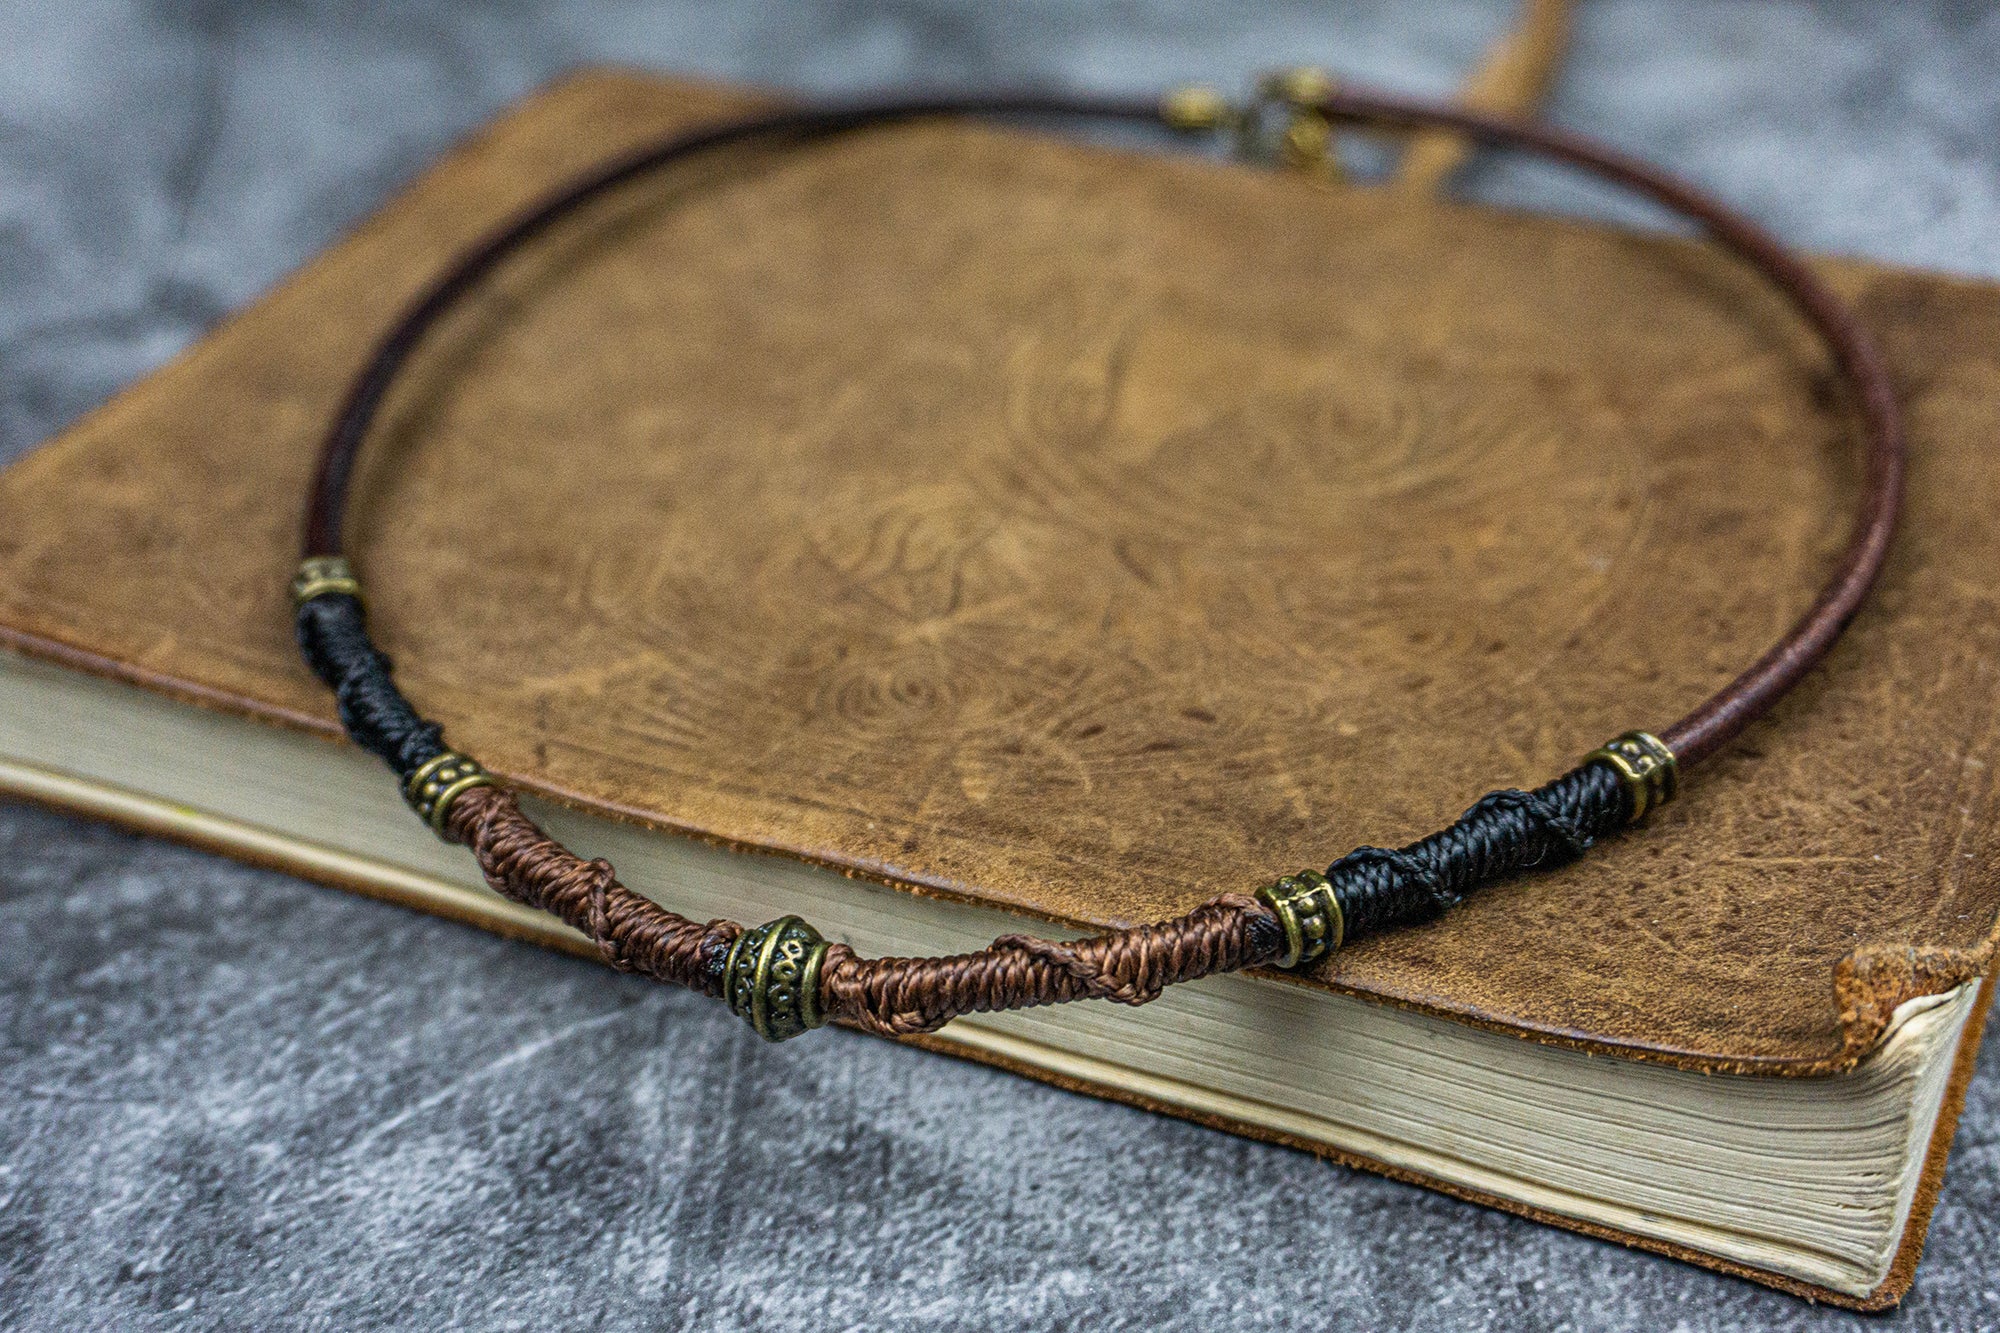 Choker Necklace Men's, Lava Rock Braided Leather Necklaces, Men Boho Hippie  Jewelry ,Oil Diffuser Surf Necklaces in Black